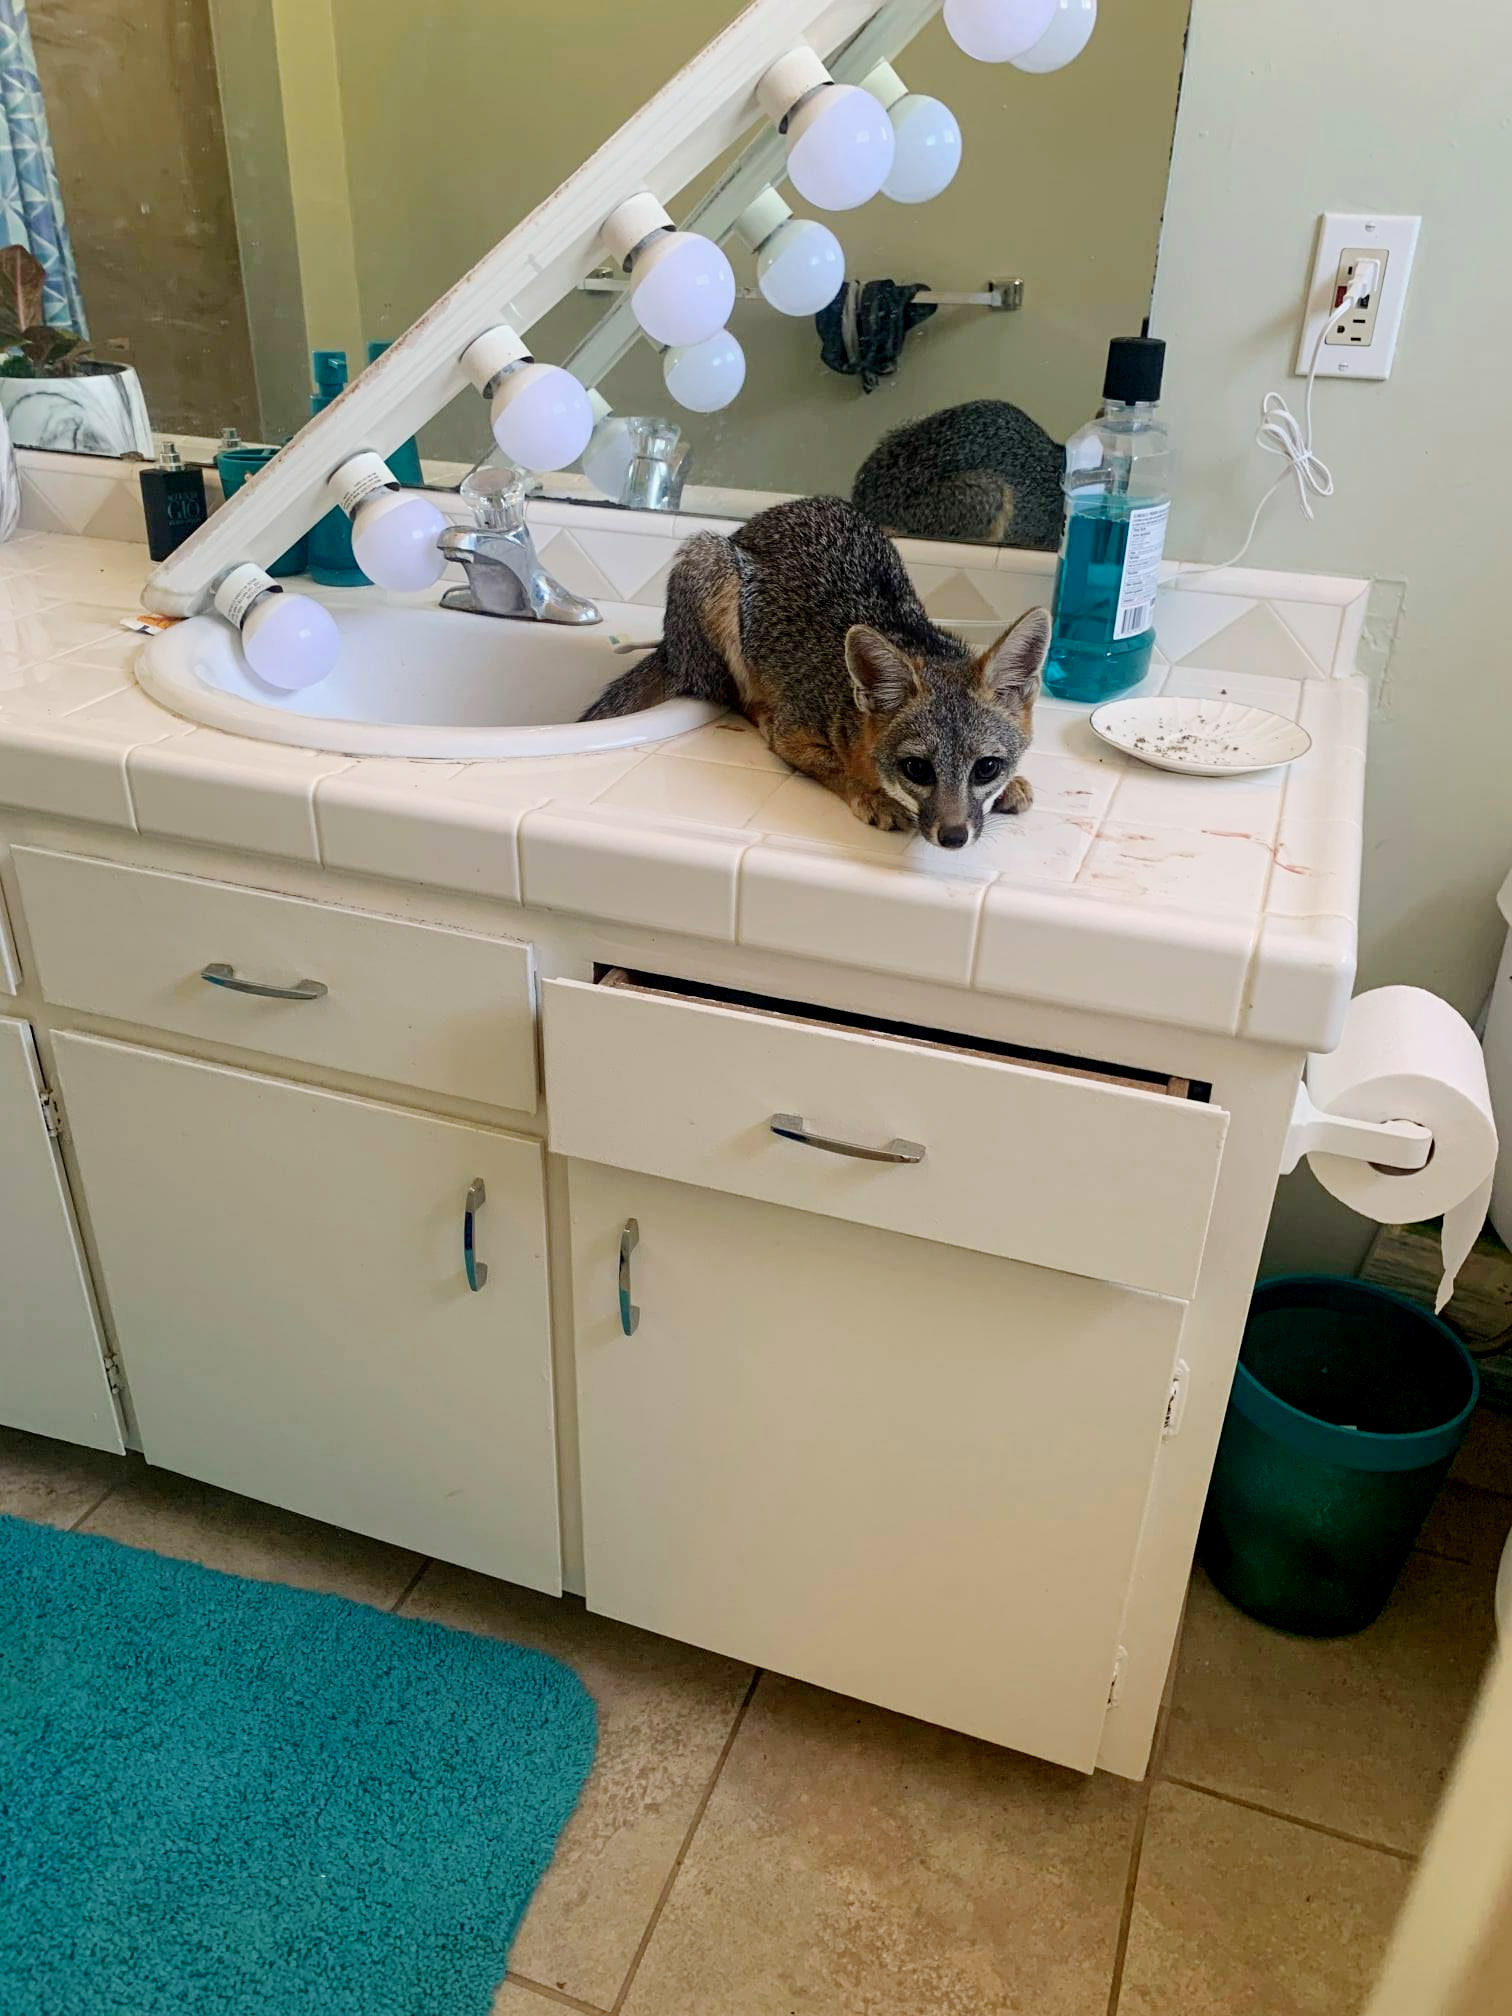 PHOTO: Residents in San Diego discovered a fox that broke into their home and spent the night in their bathroom on Oct. 14, 2019.